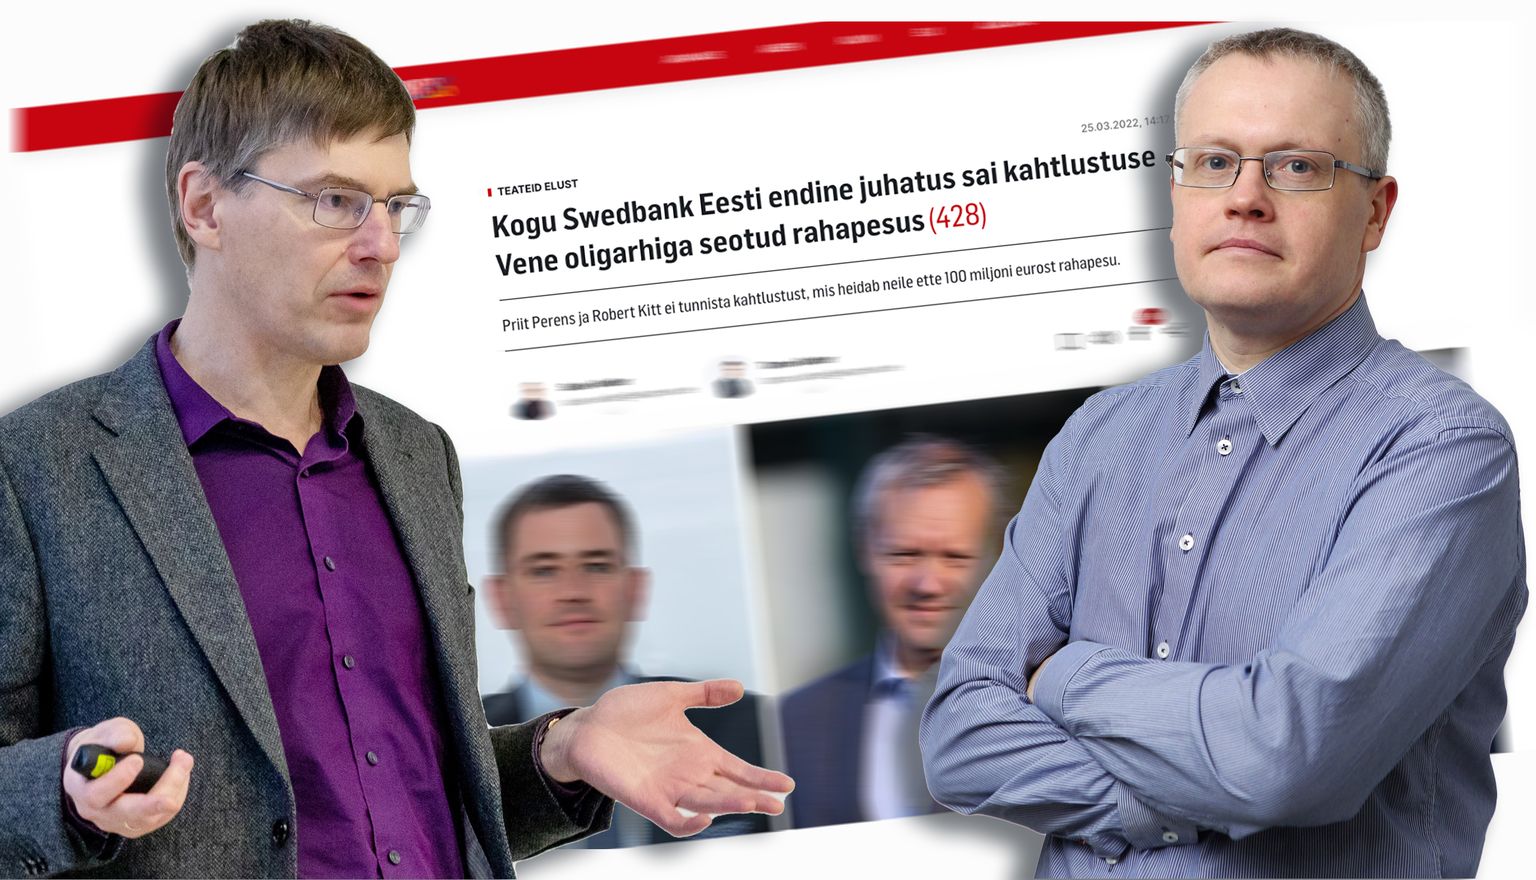 Tarmo Vahter and Sulev Vedler and their article on Swedbank's money laundering. V pozadí Robert Kitt a Priit Perens.